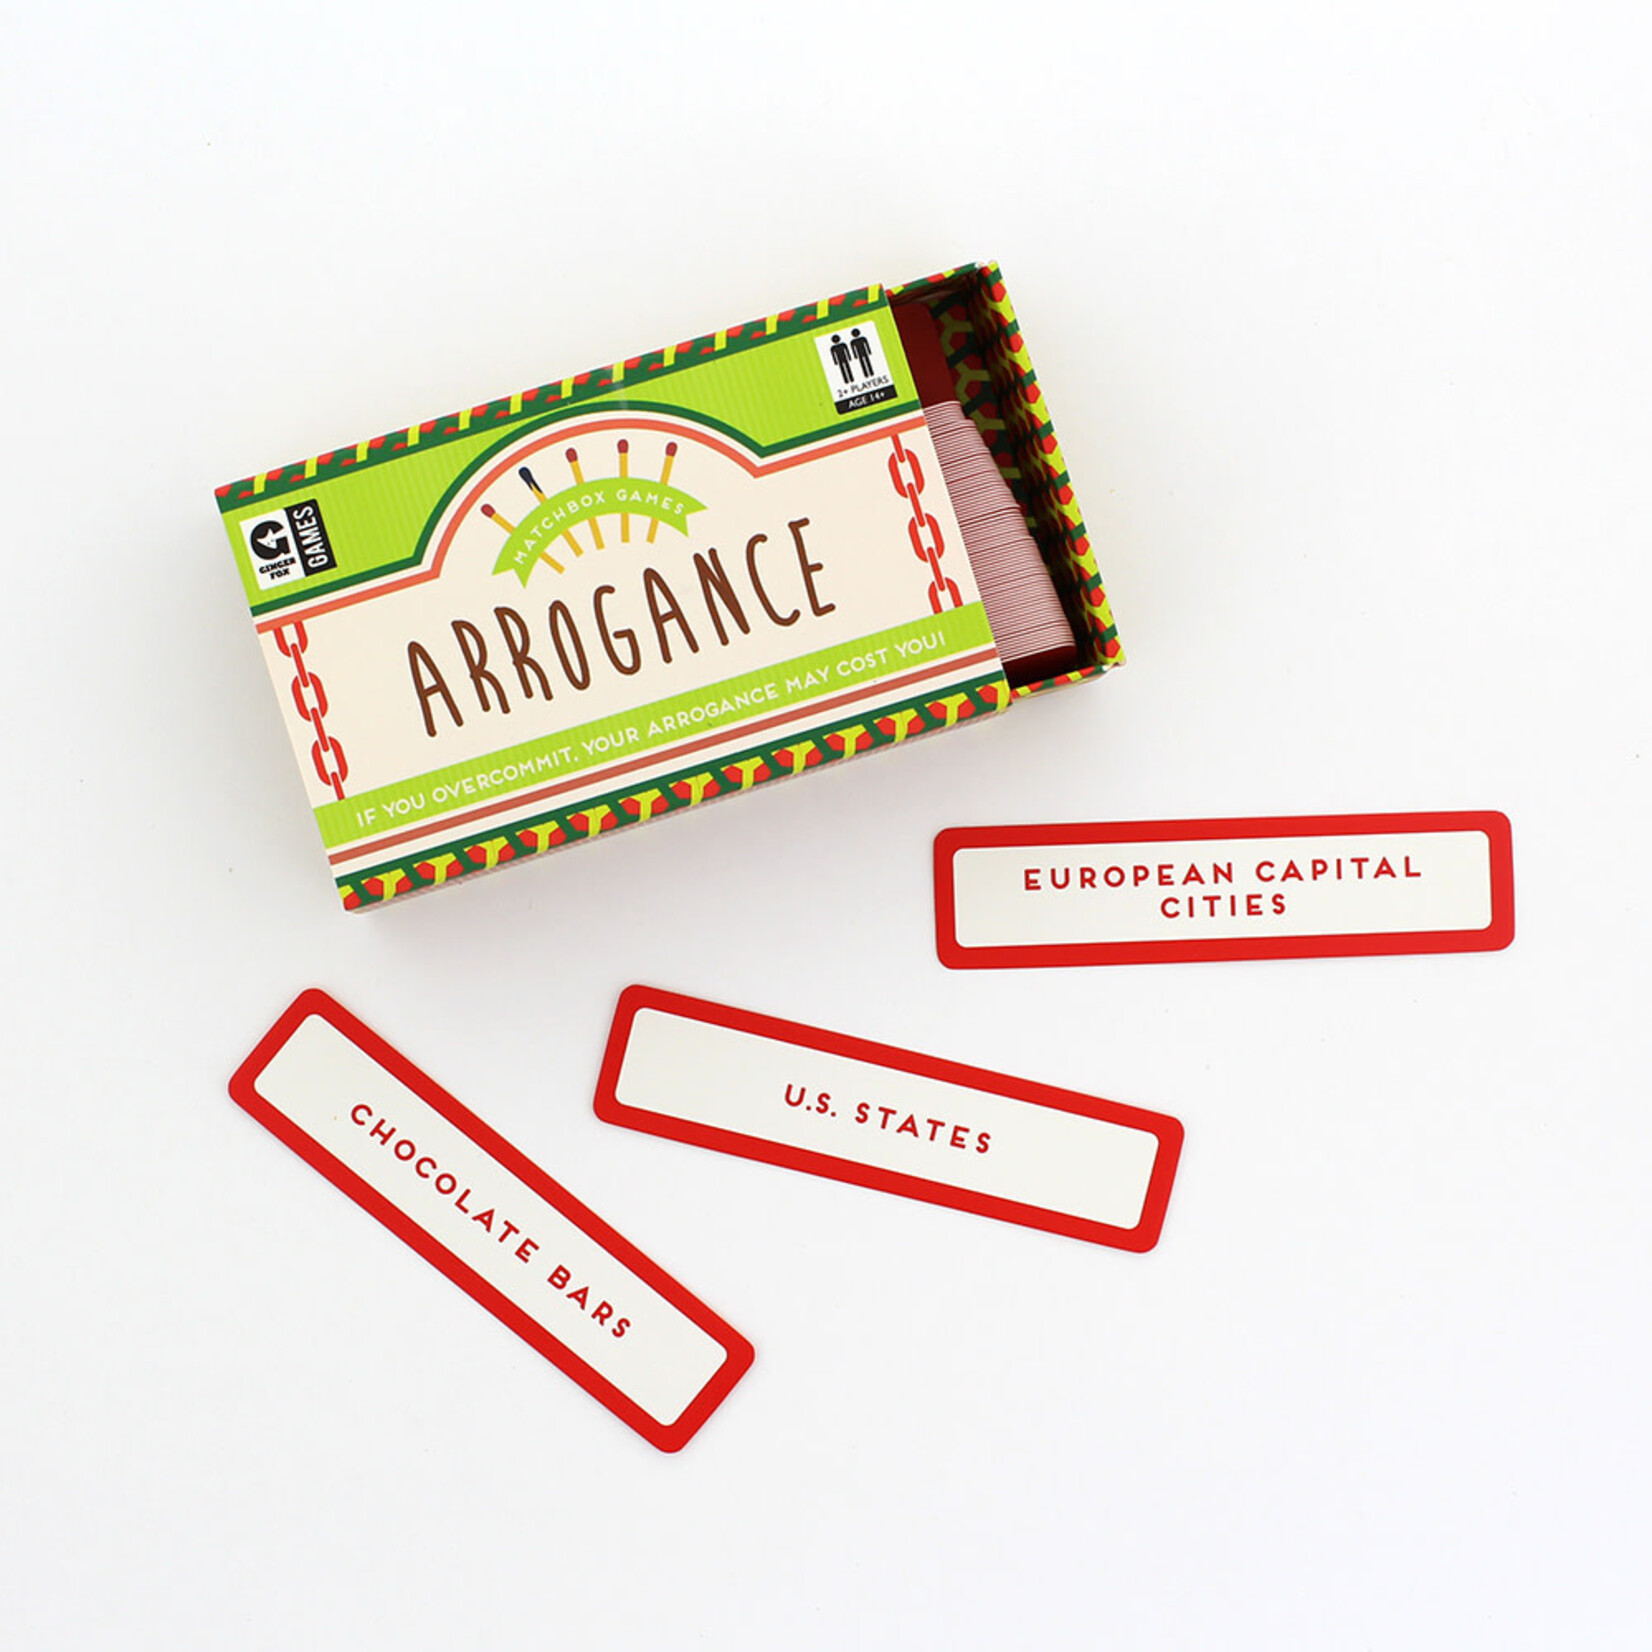 Ginger Fox Matchbox Games: Arrogance – If You Overcommit Your Arrogance May Cost You